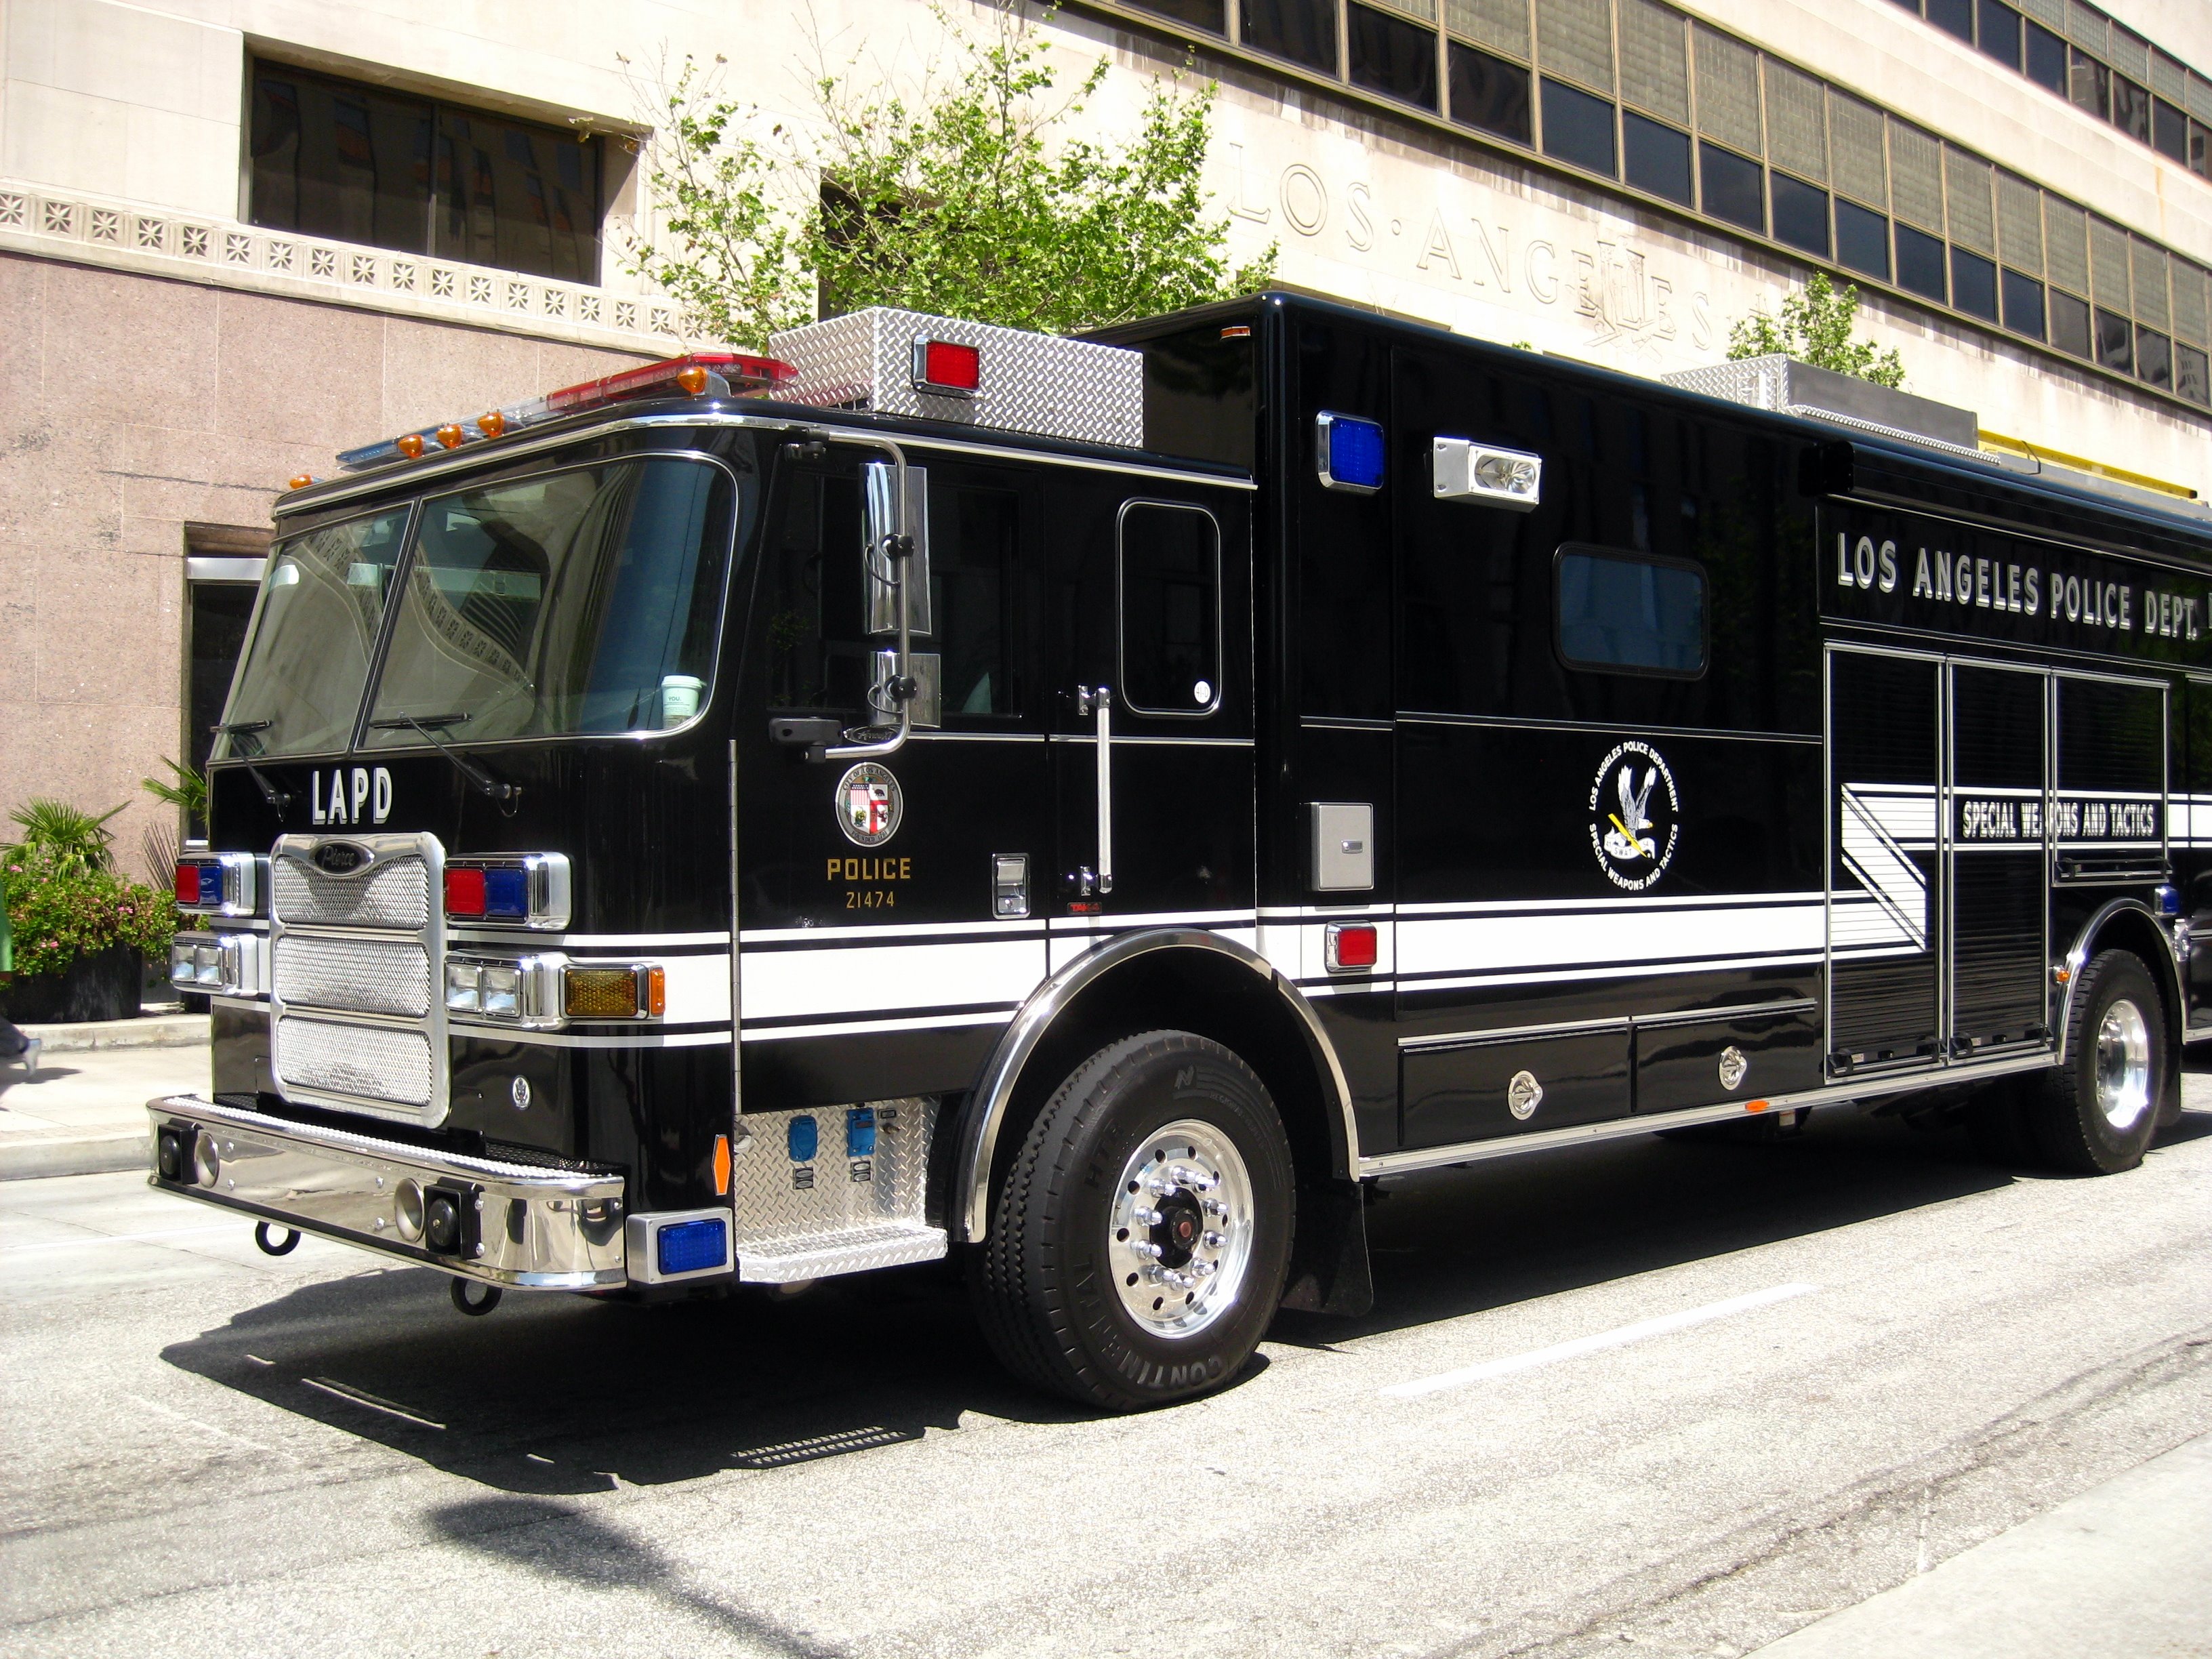 LAPD_SWAT_truck_-_1 | Police cars, Vehicle and Fire trucks